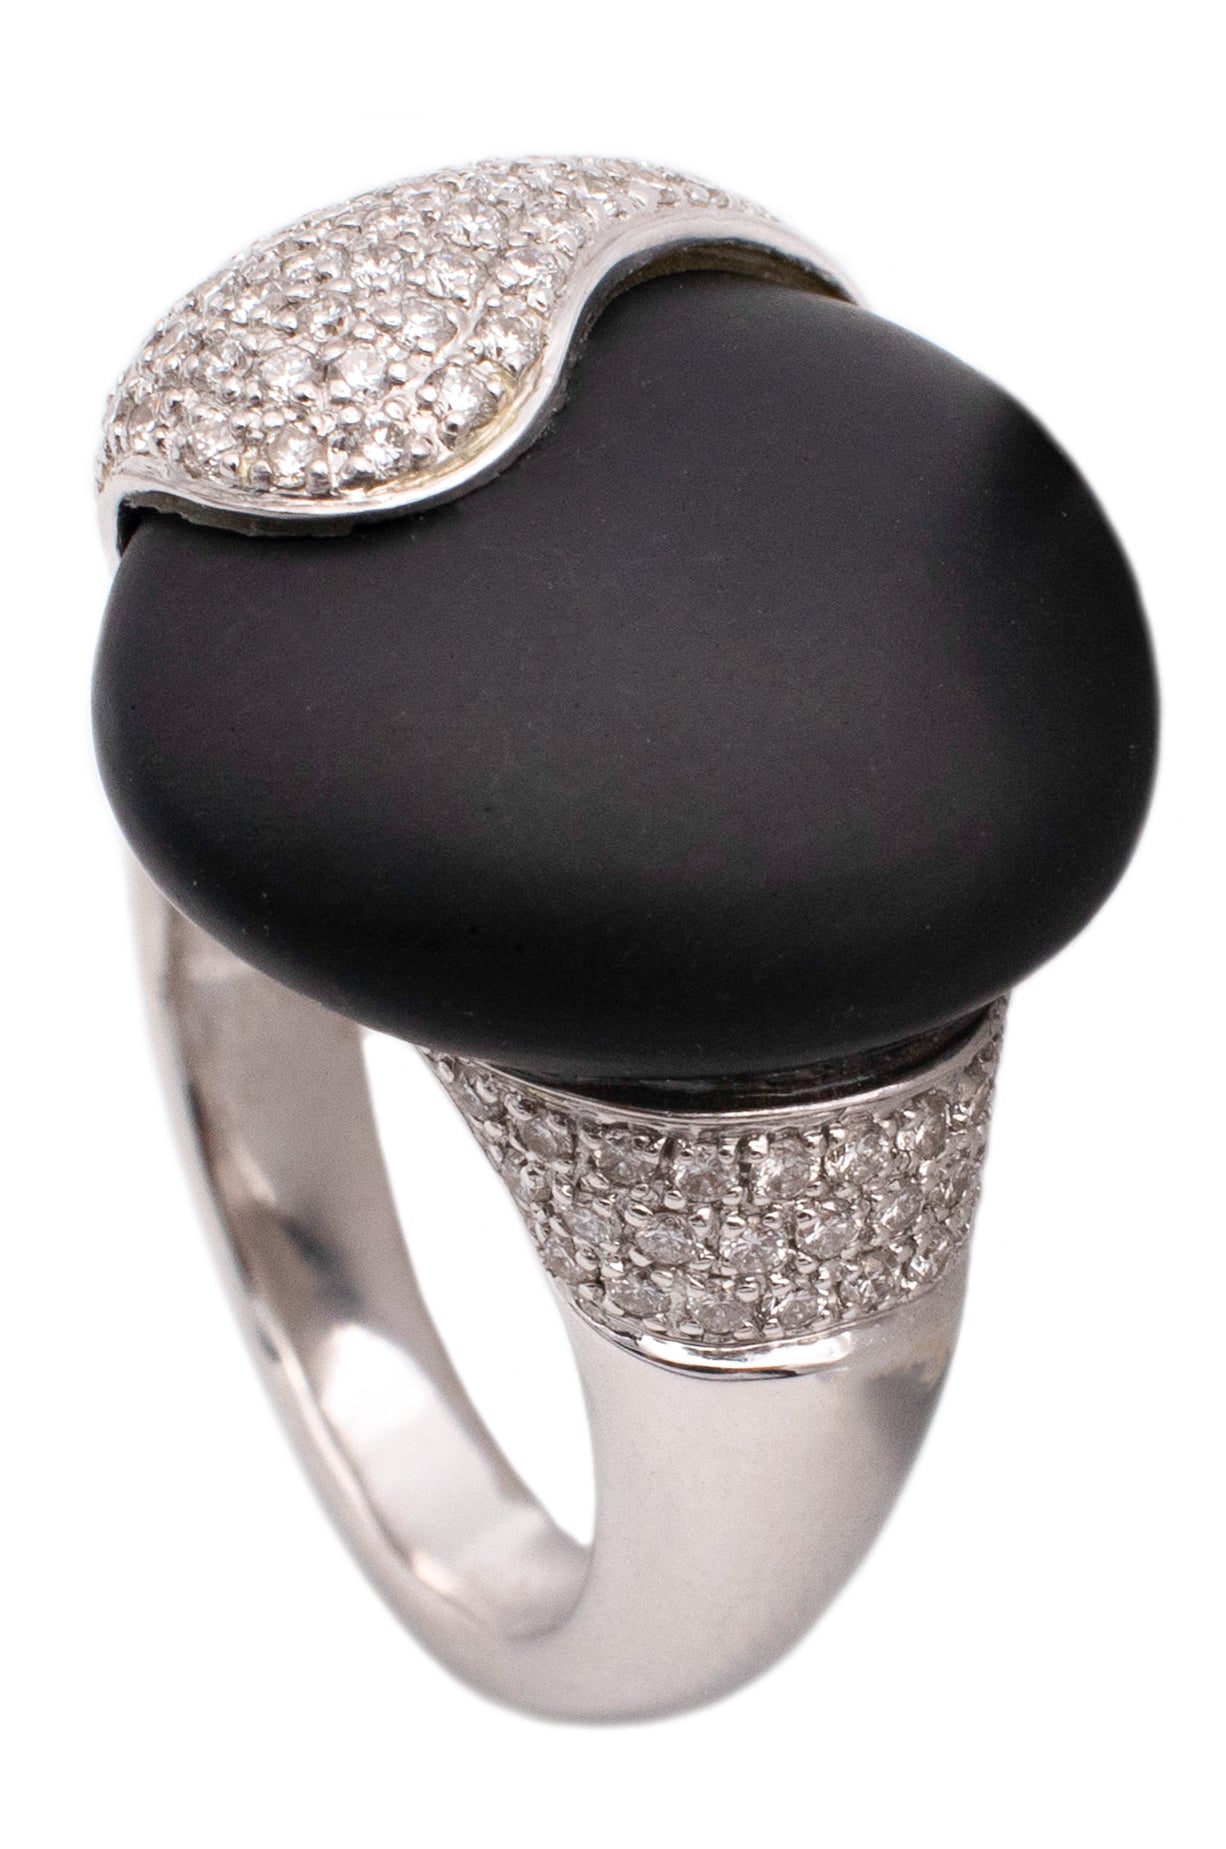 Meister Of Zurich 18Kt White Gold Ring With VS Diamonds And Frosted Black Onyx